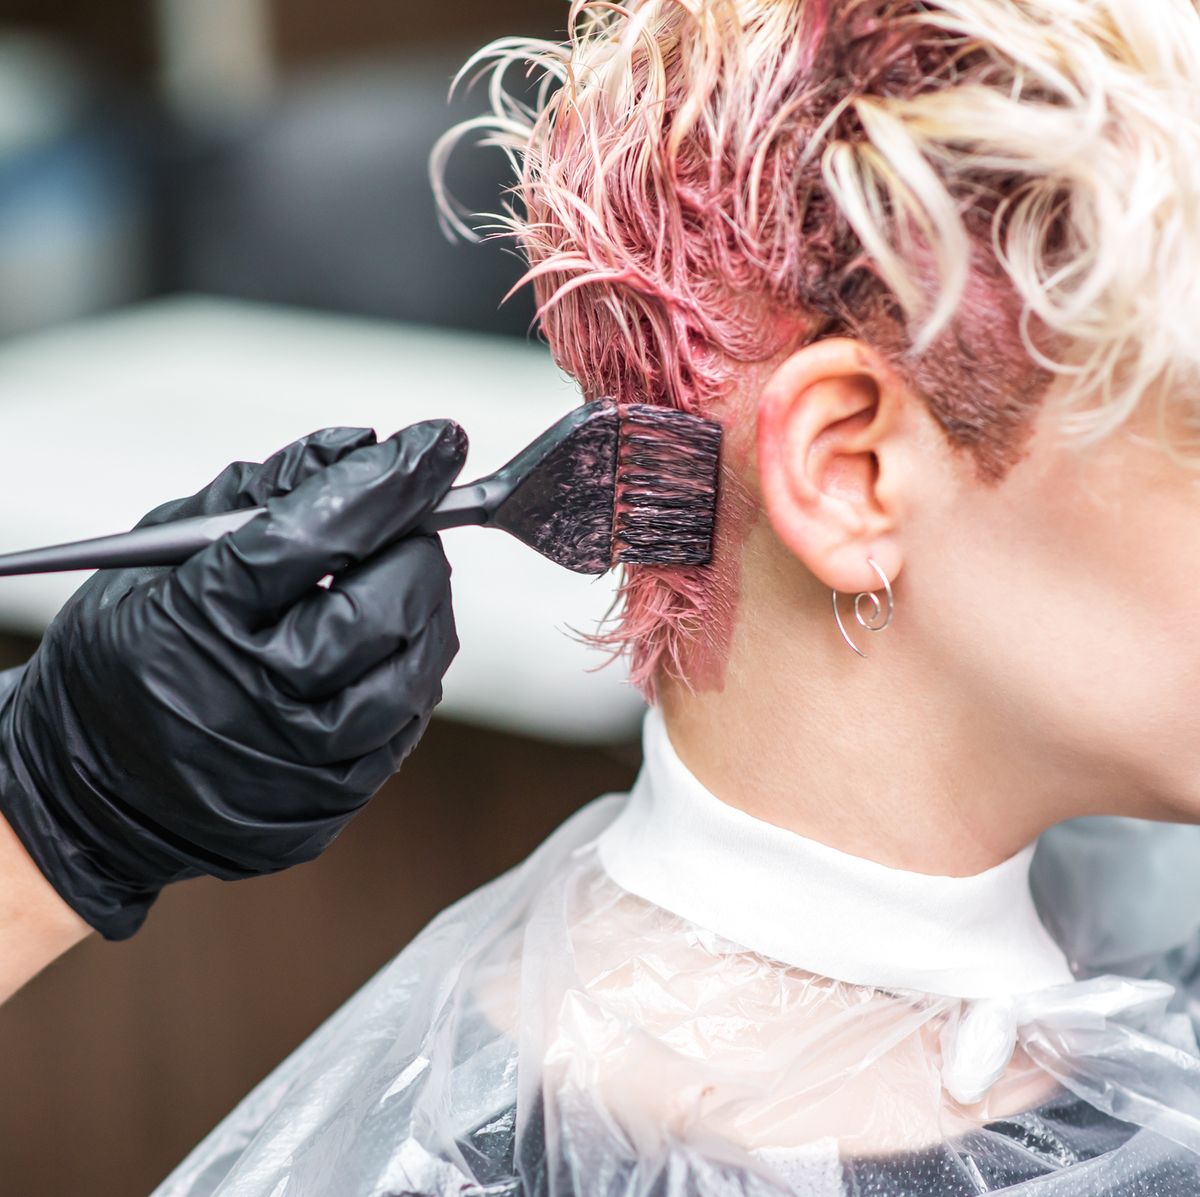 How to Get Hair Dye Off Your Skin: Safe, Effective DIY Methods